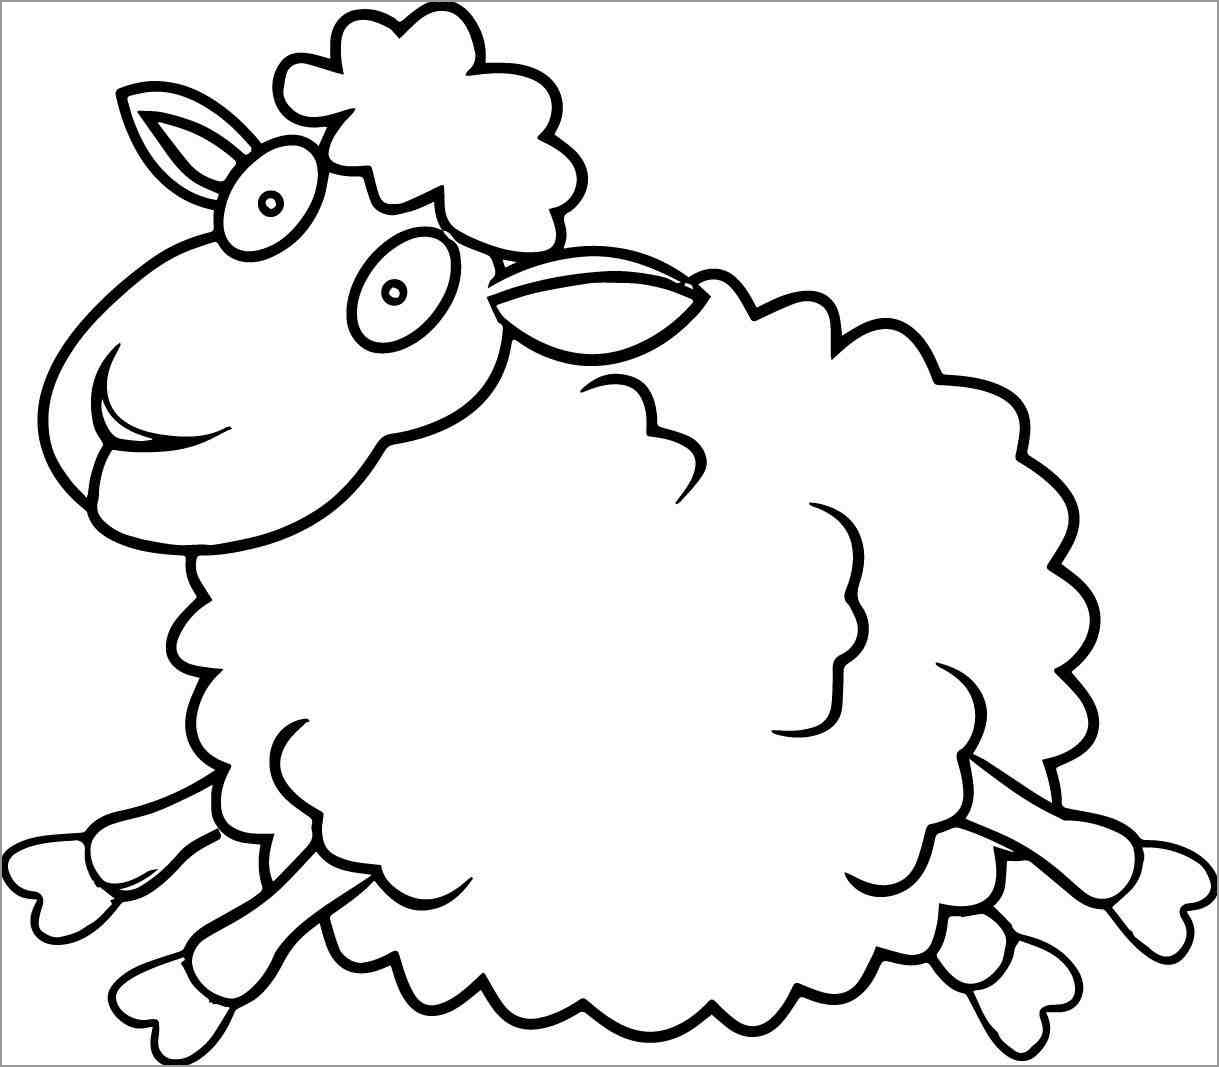 Sheep Coloring Pages   ColoringBay